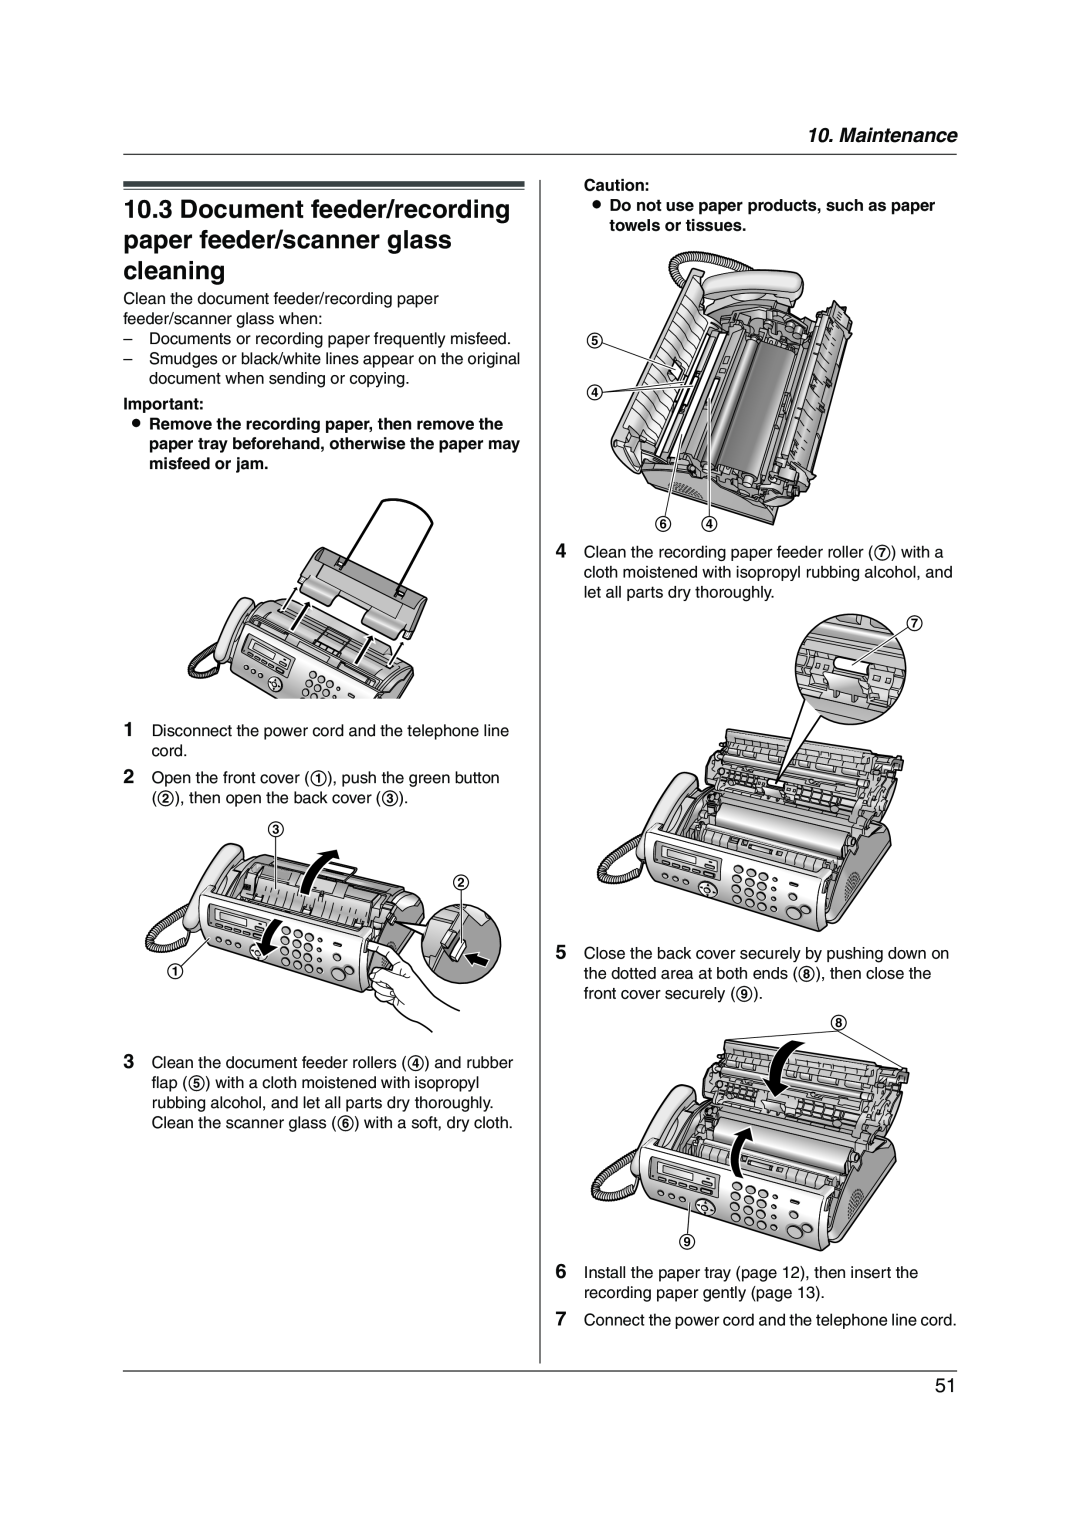 Panasonic KX-FP215 operating instructions Document feeder/recording paper feeder/scanner glass cleaning, Maintenance 